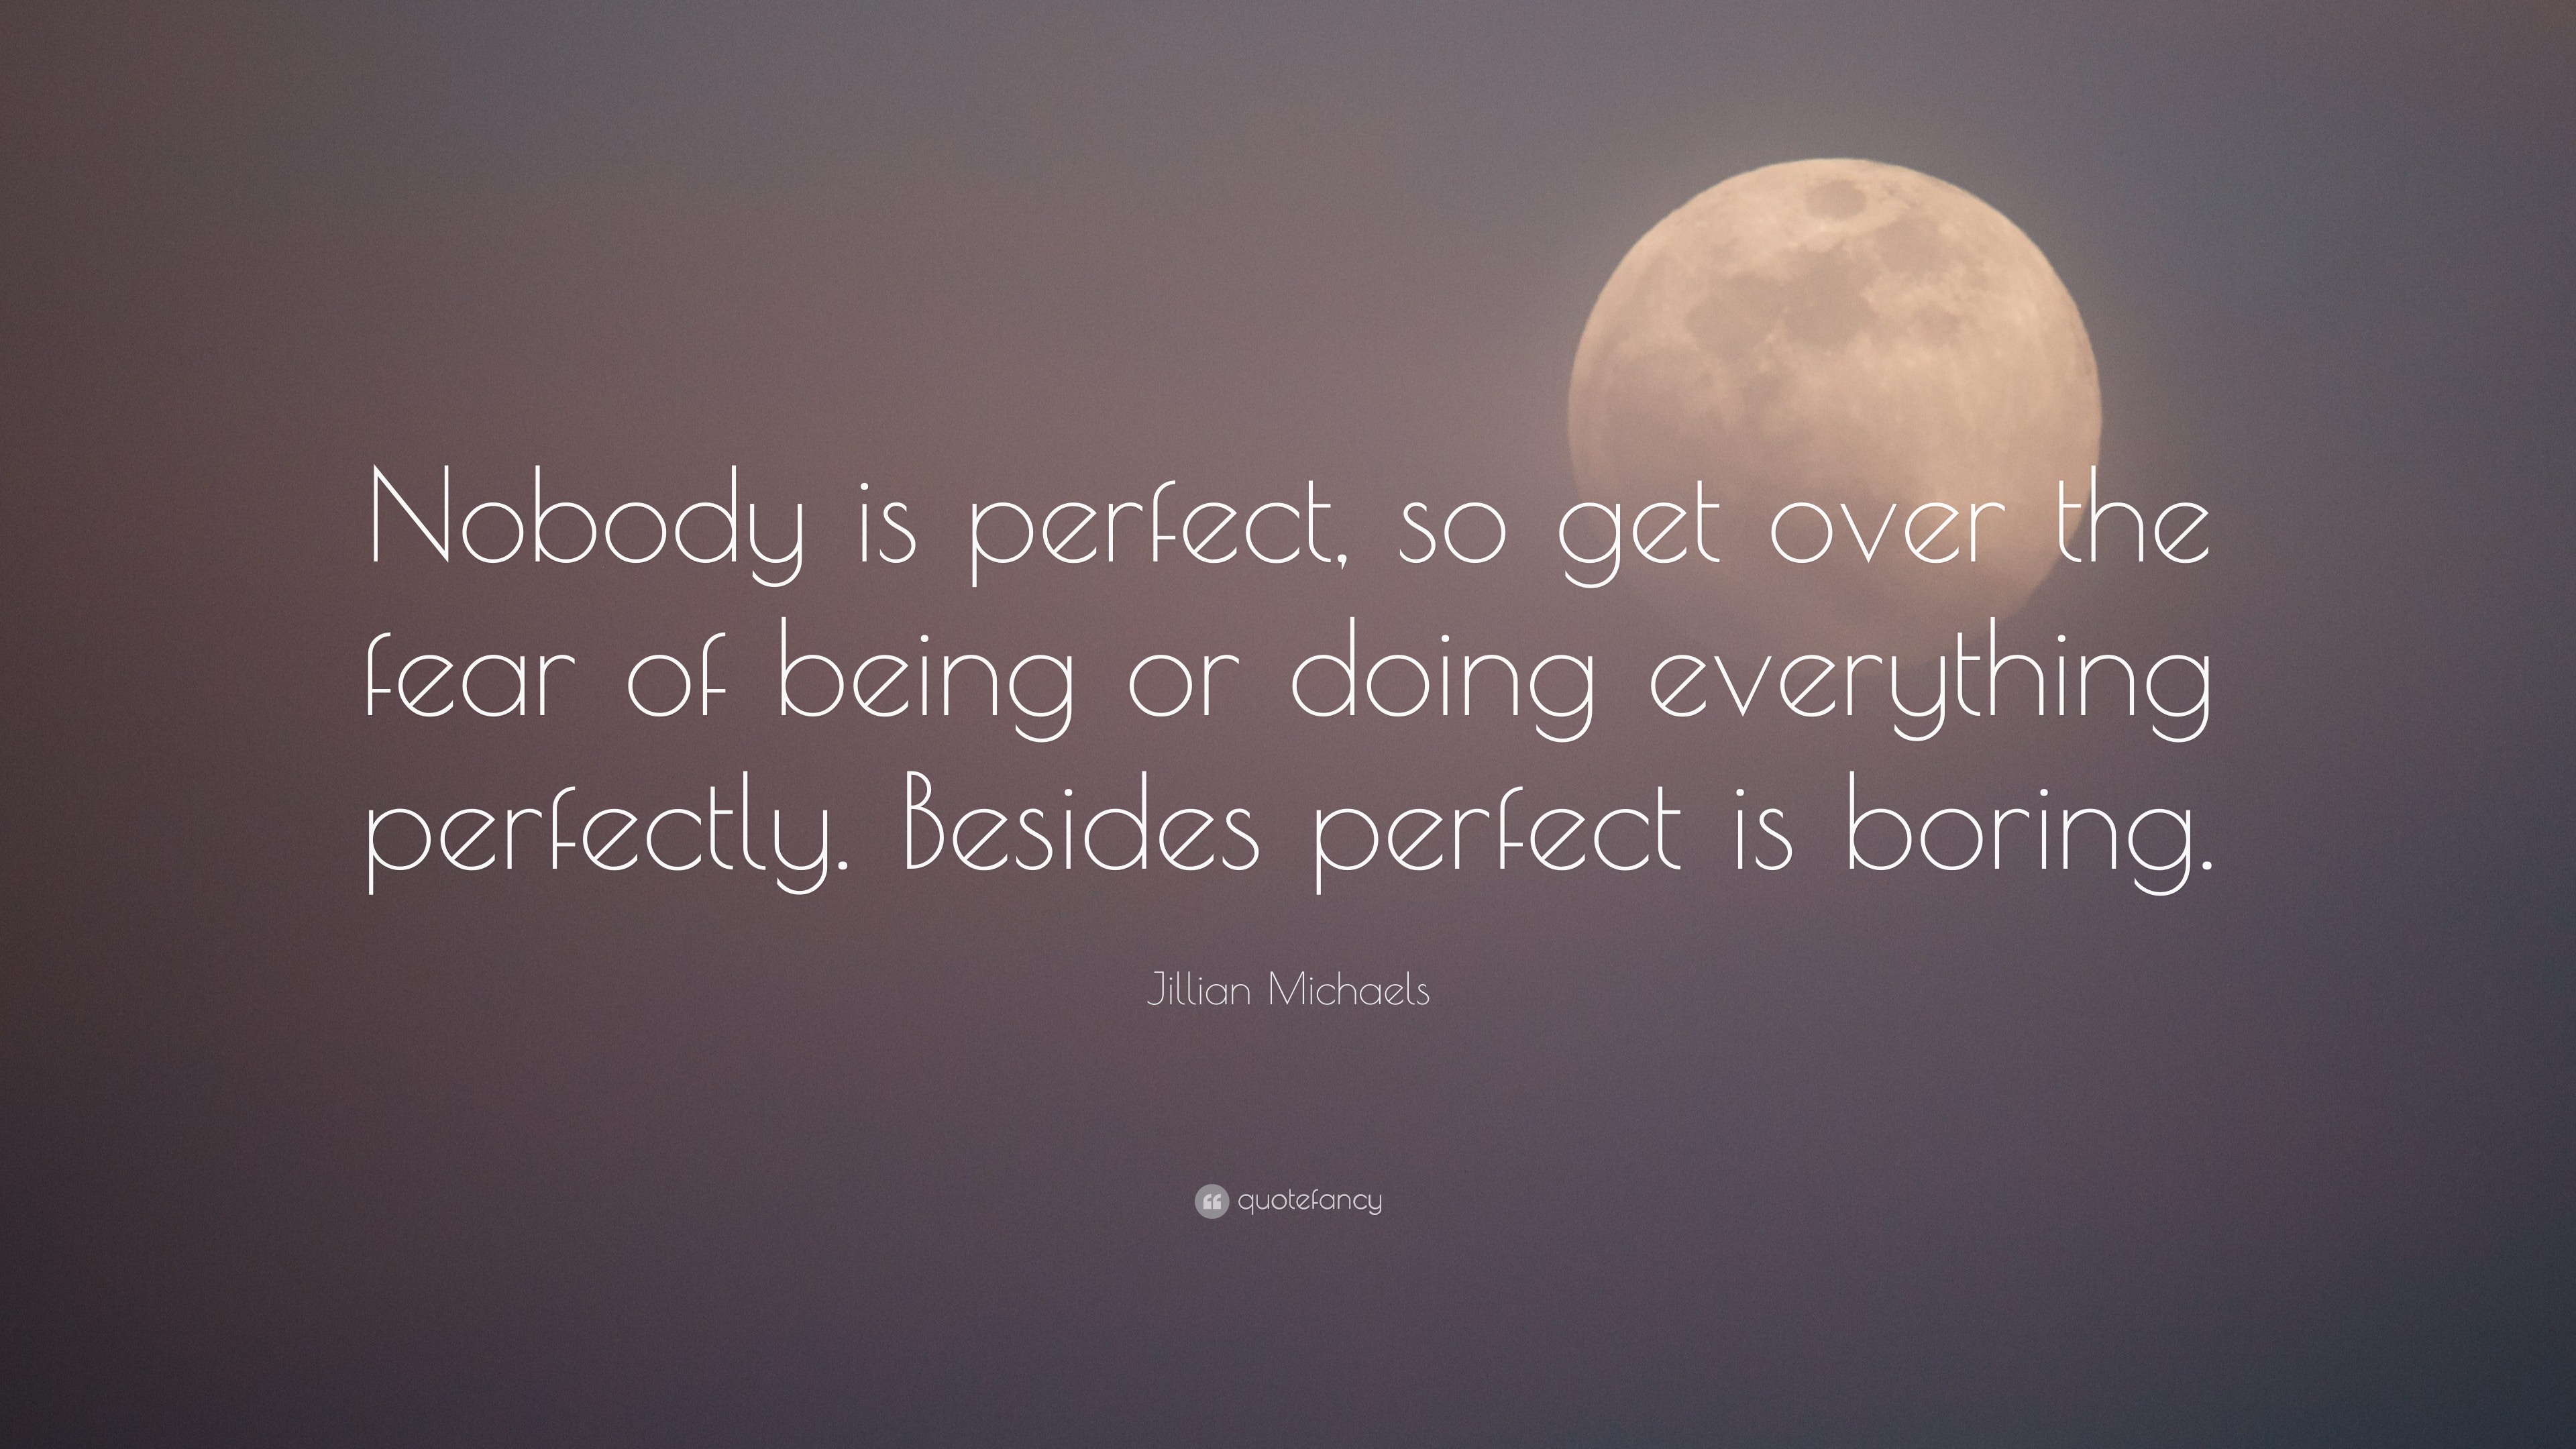 Jillian Michaels Quote: “Nobody is perfect, so get over the fear of ...